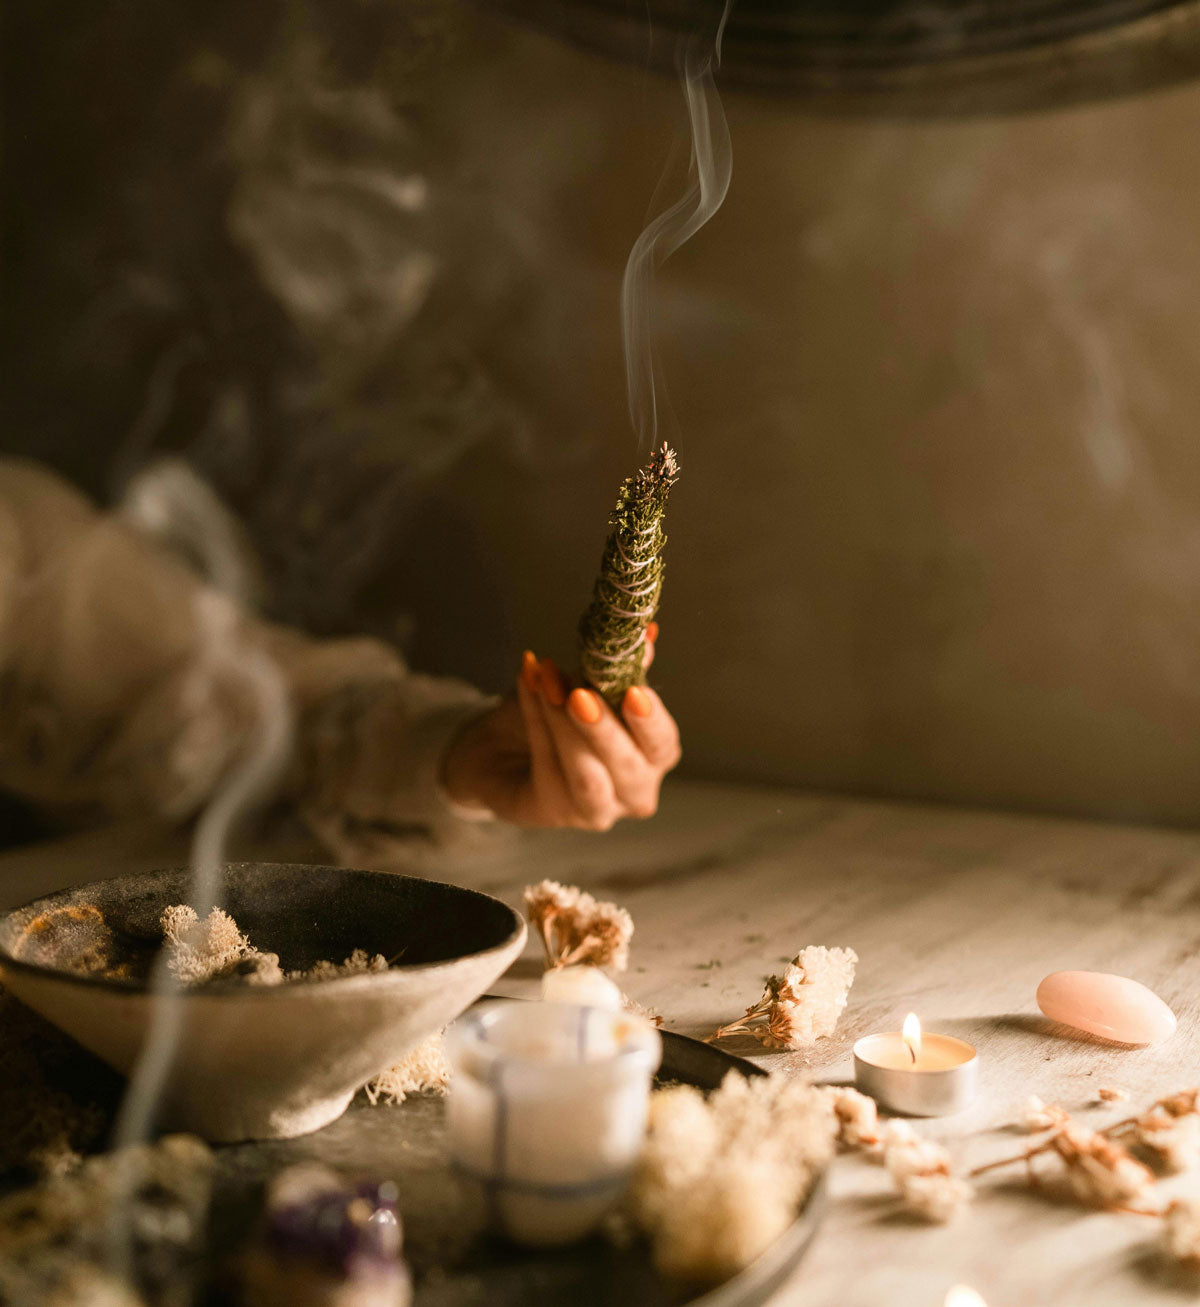 Photo of a ritual performed. Incense being lit and crystals. https://www.pexels.com/@anastasia-shuraeva/